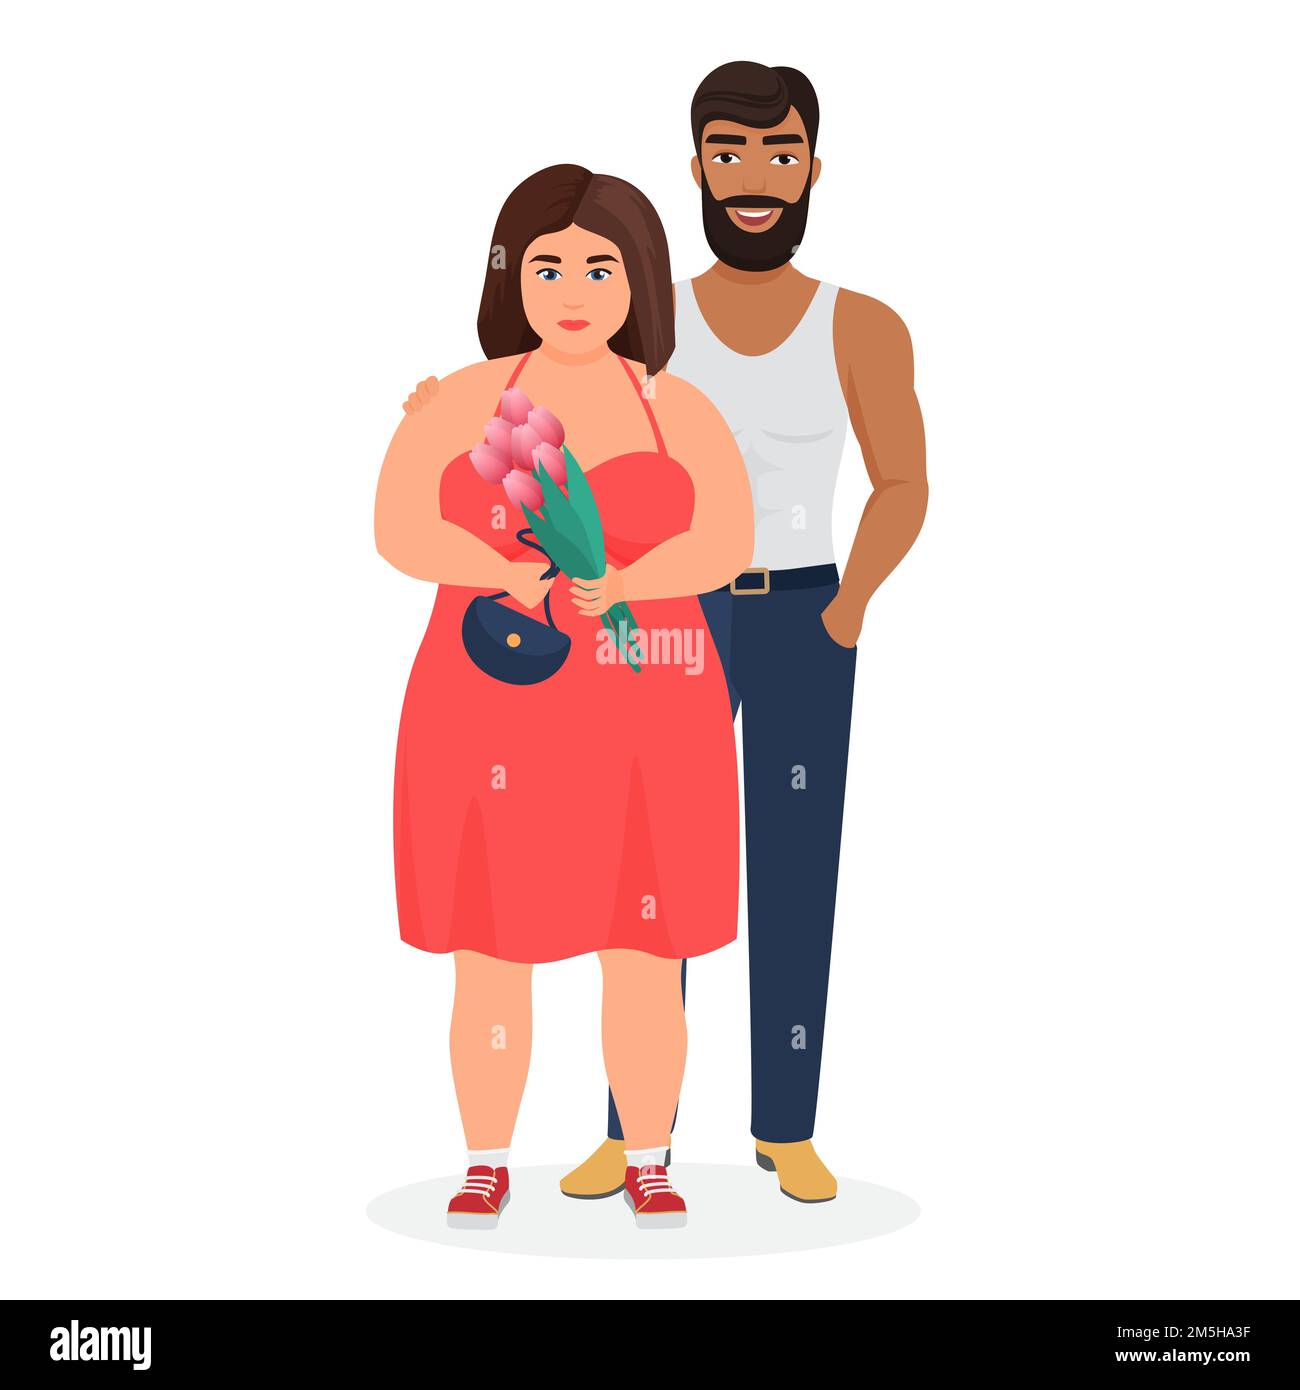 Strong dark skin man and fat caucasian woman couple, love against stereotypes Stock Vector